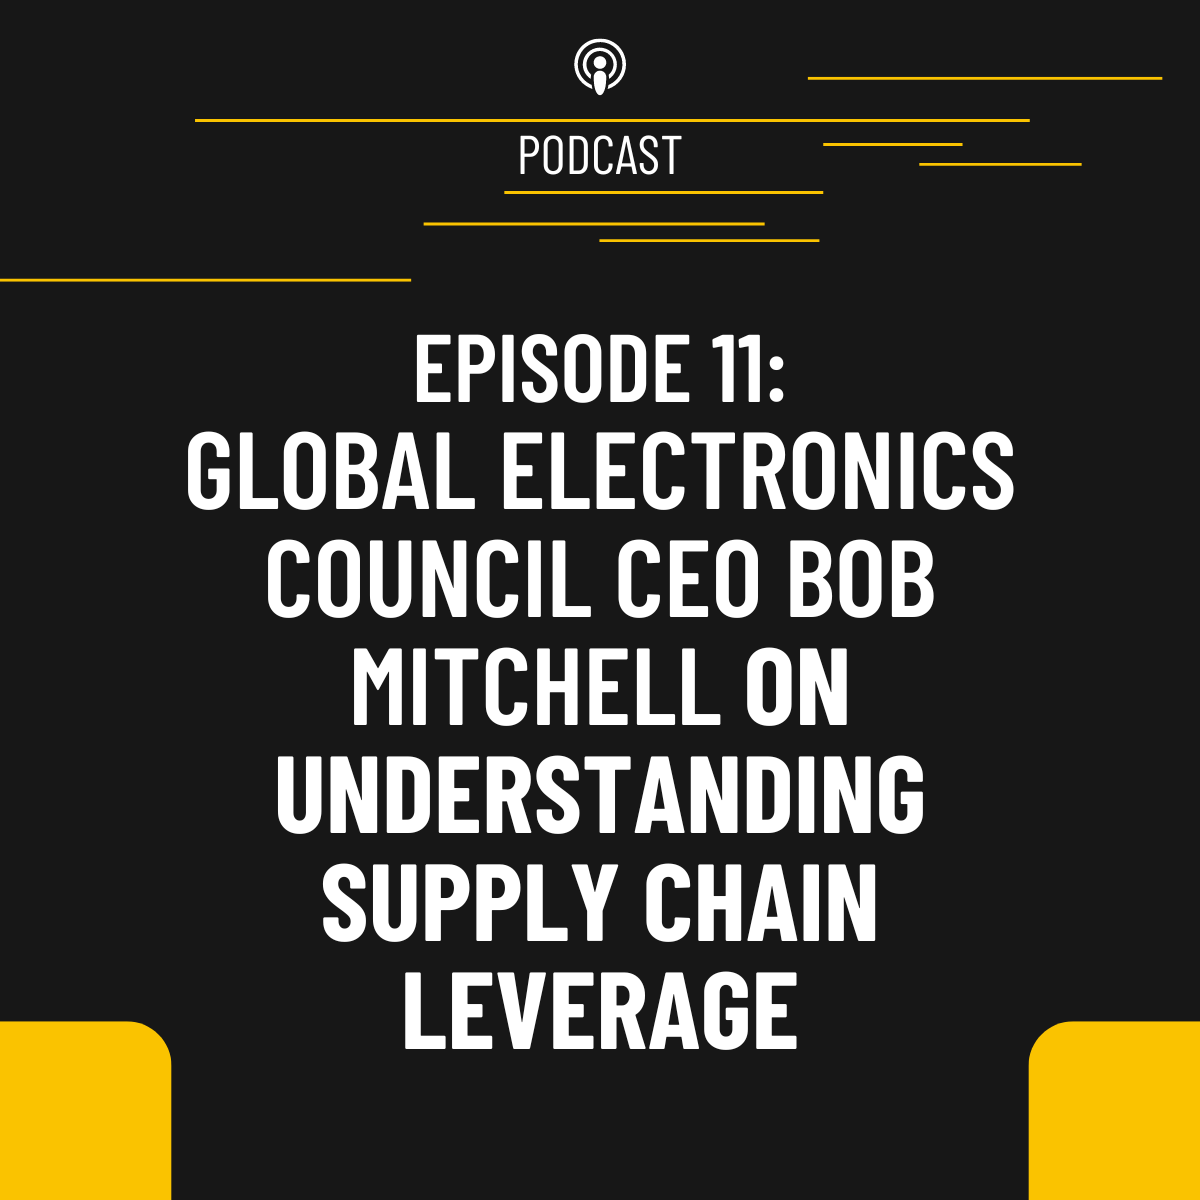 "episode 11 global electronics council ceo bob mitchell on understanding supply chain leverage"